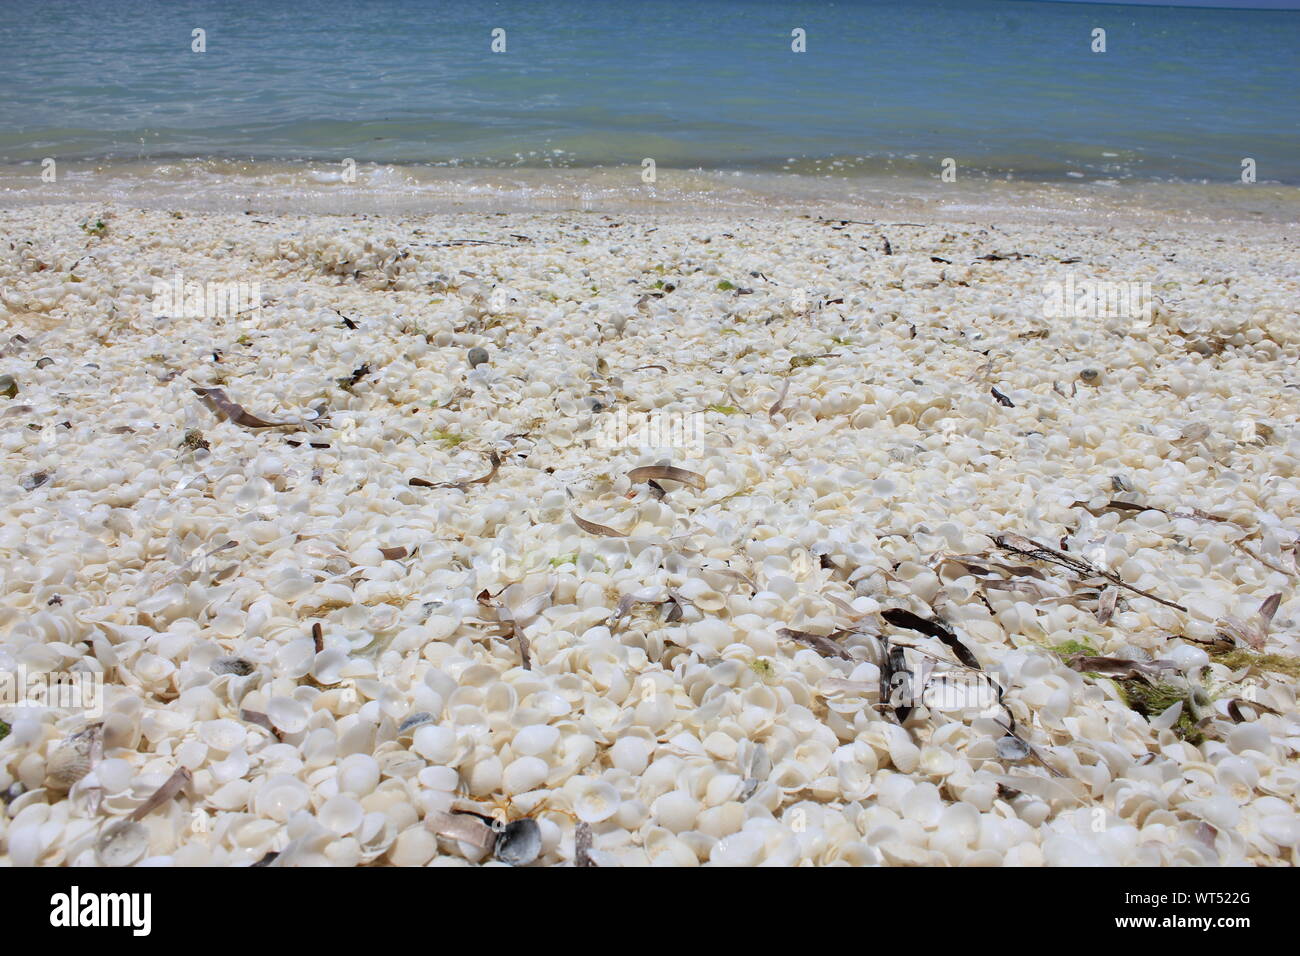 Shell beach in Shark Bay, Western Australia. Beach made of shells instead of sand, because of the high salinity, the mollusc live only for 18 months. Stock Photo